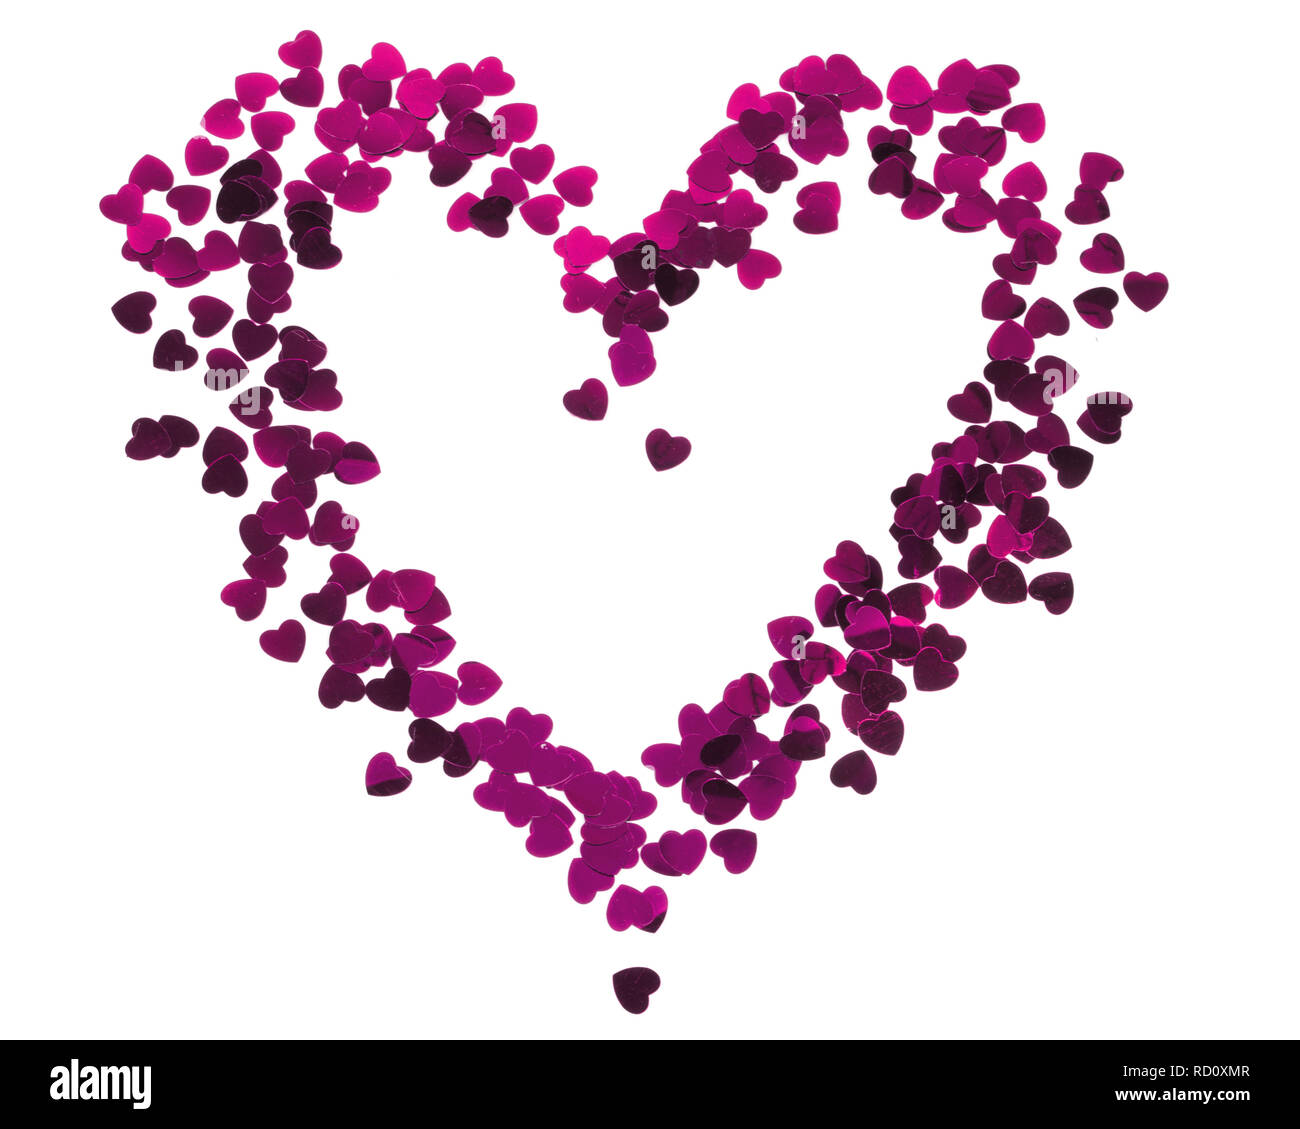 Heart silhouette made of red confetti. Valentines card Stock Photo